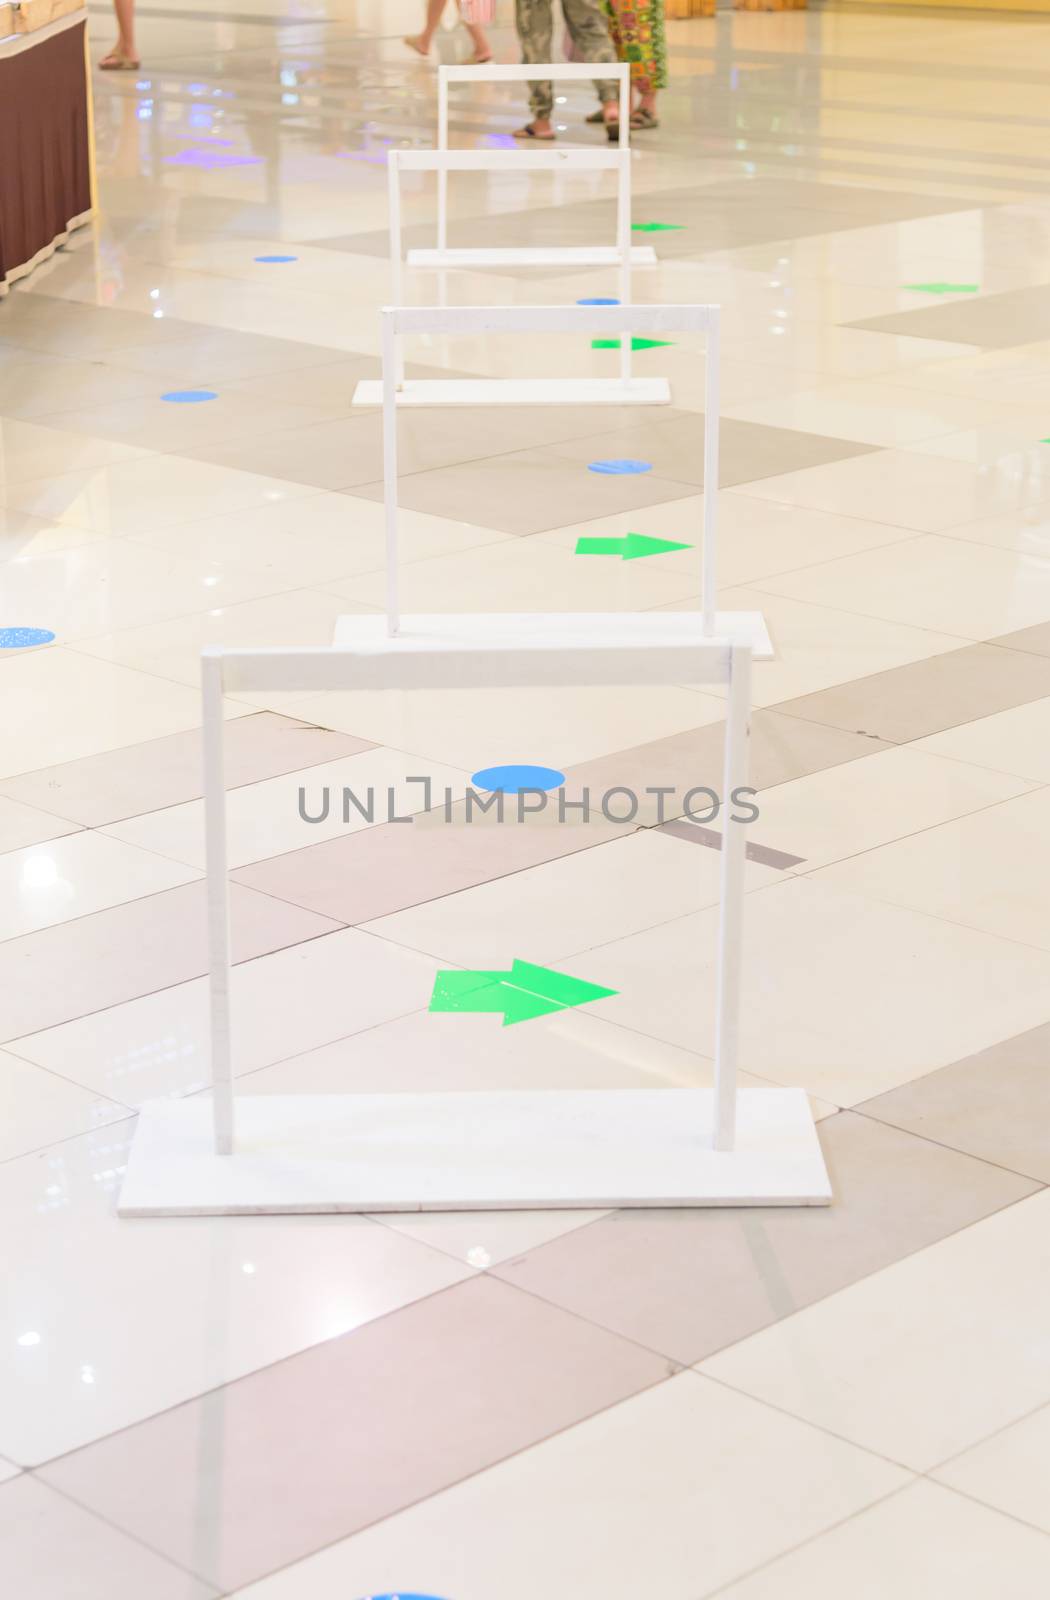 social distancing sign at the floor for shopping Queue